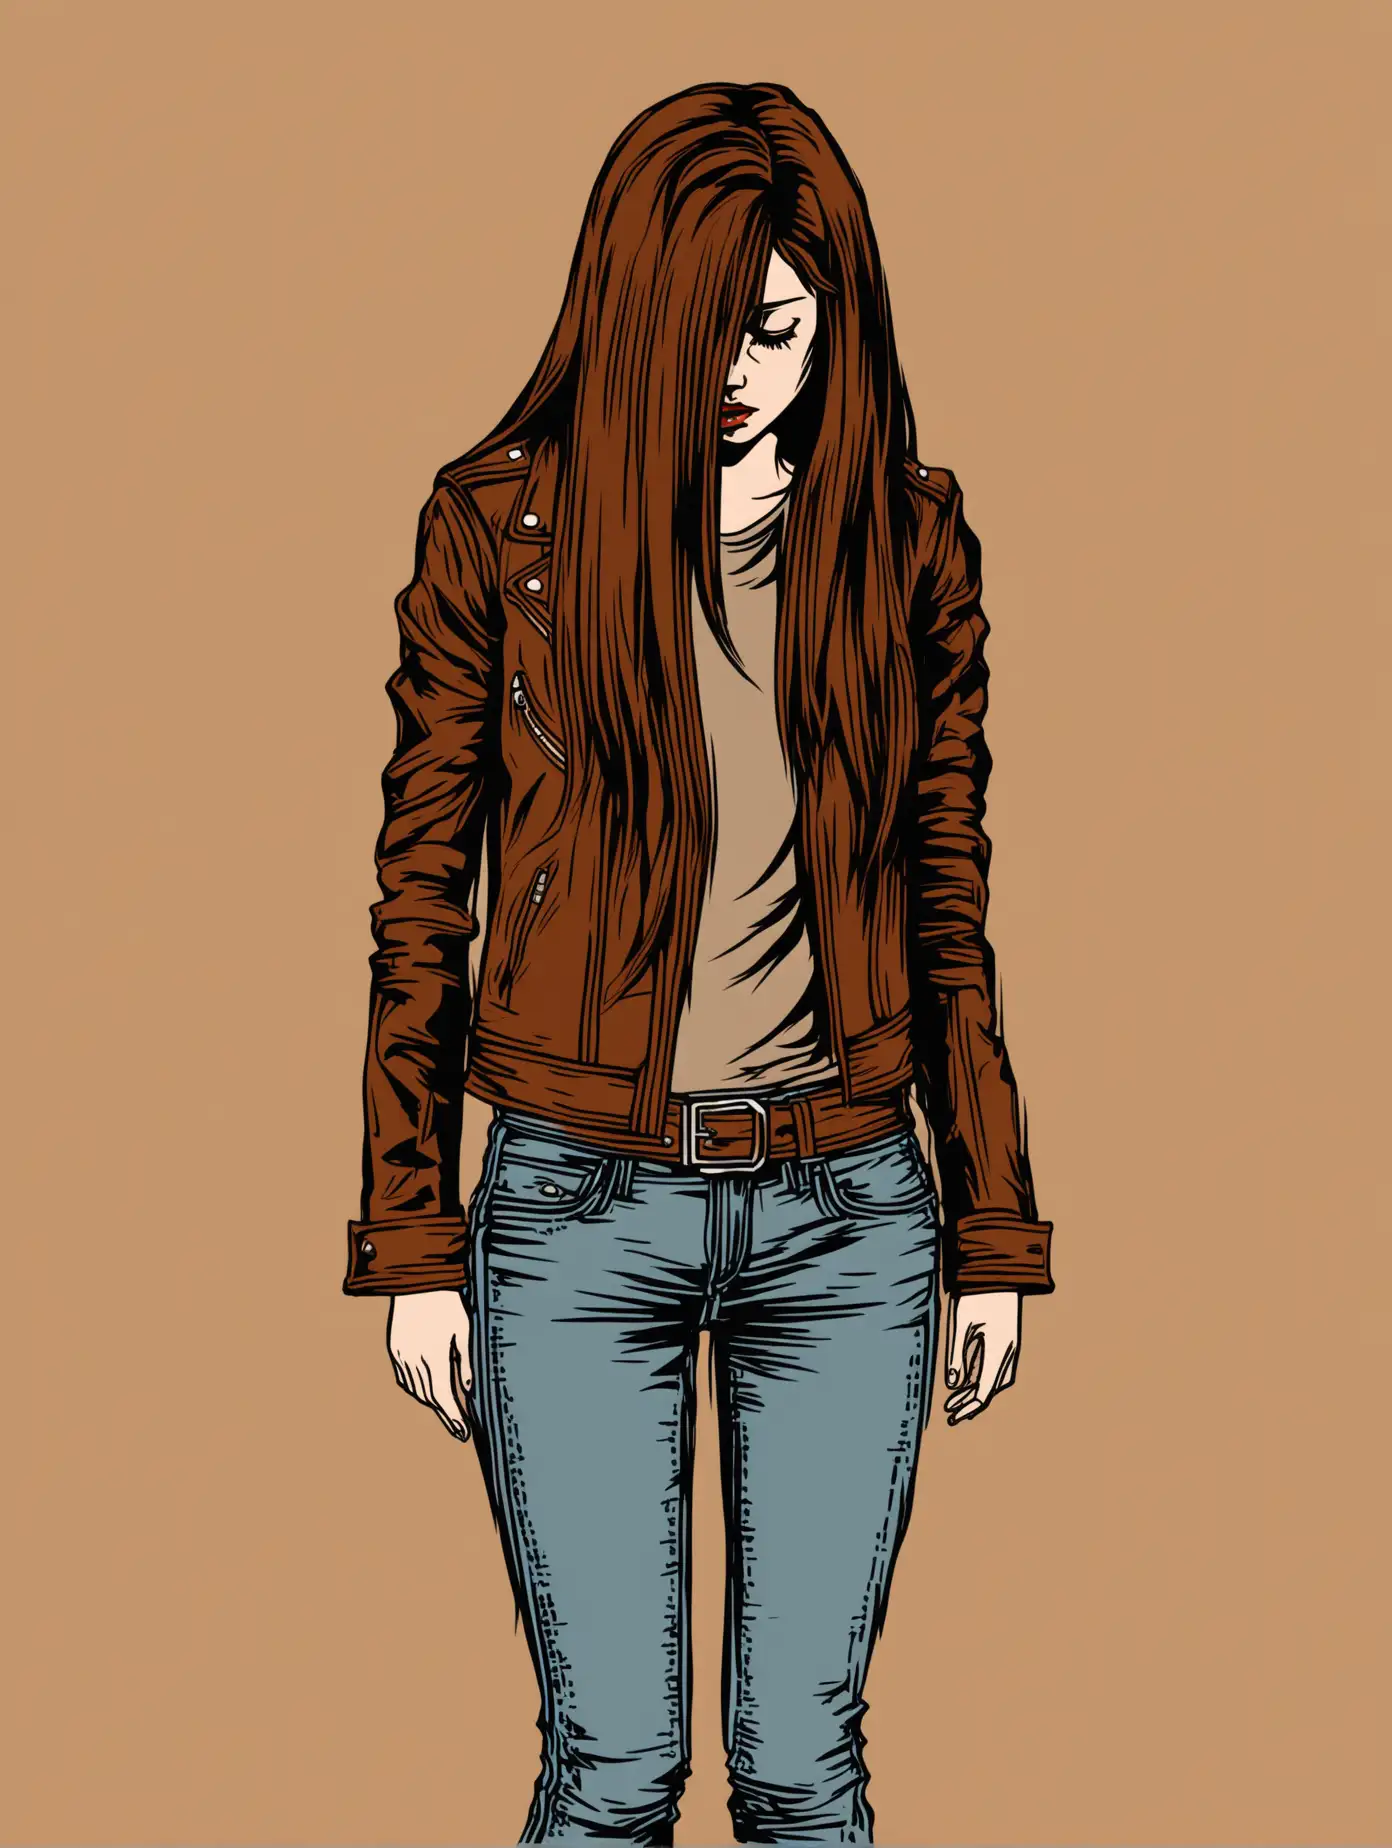 Young Woman in Brown Leather Jacket and Jeans with Devilish Hair